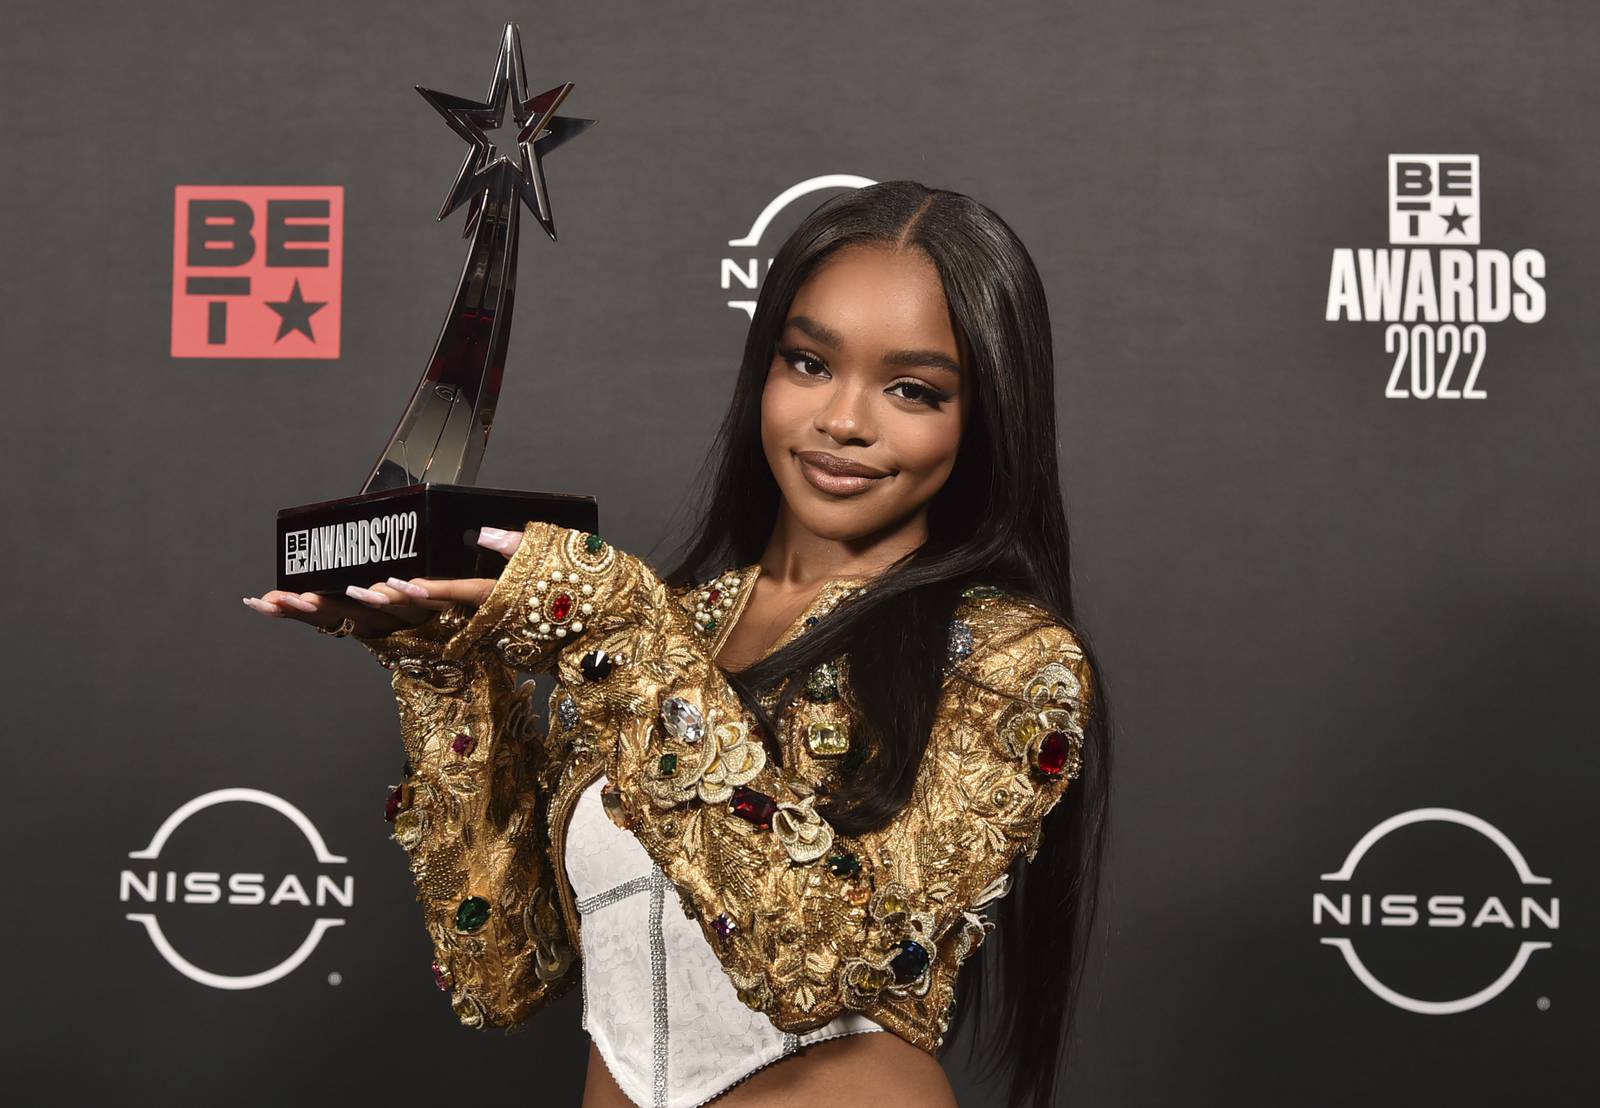 BET Awards 2022 complete list of winners